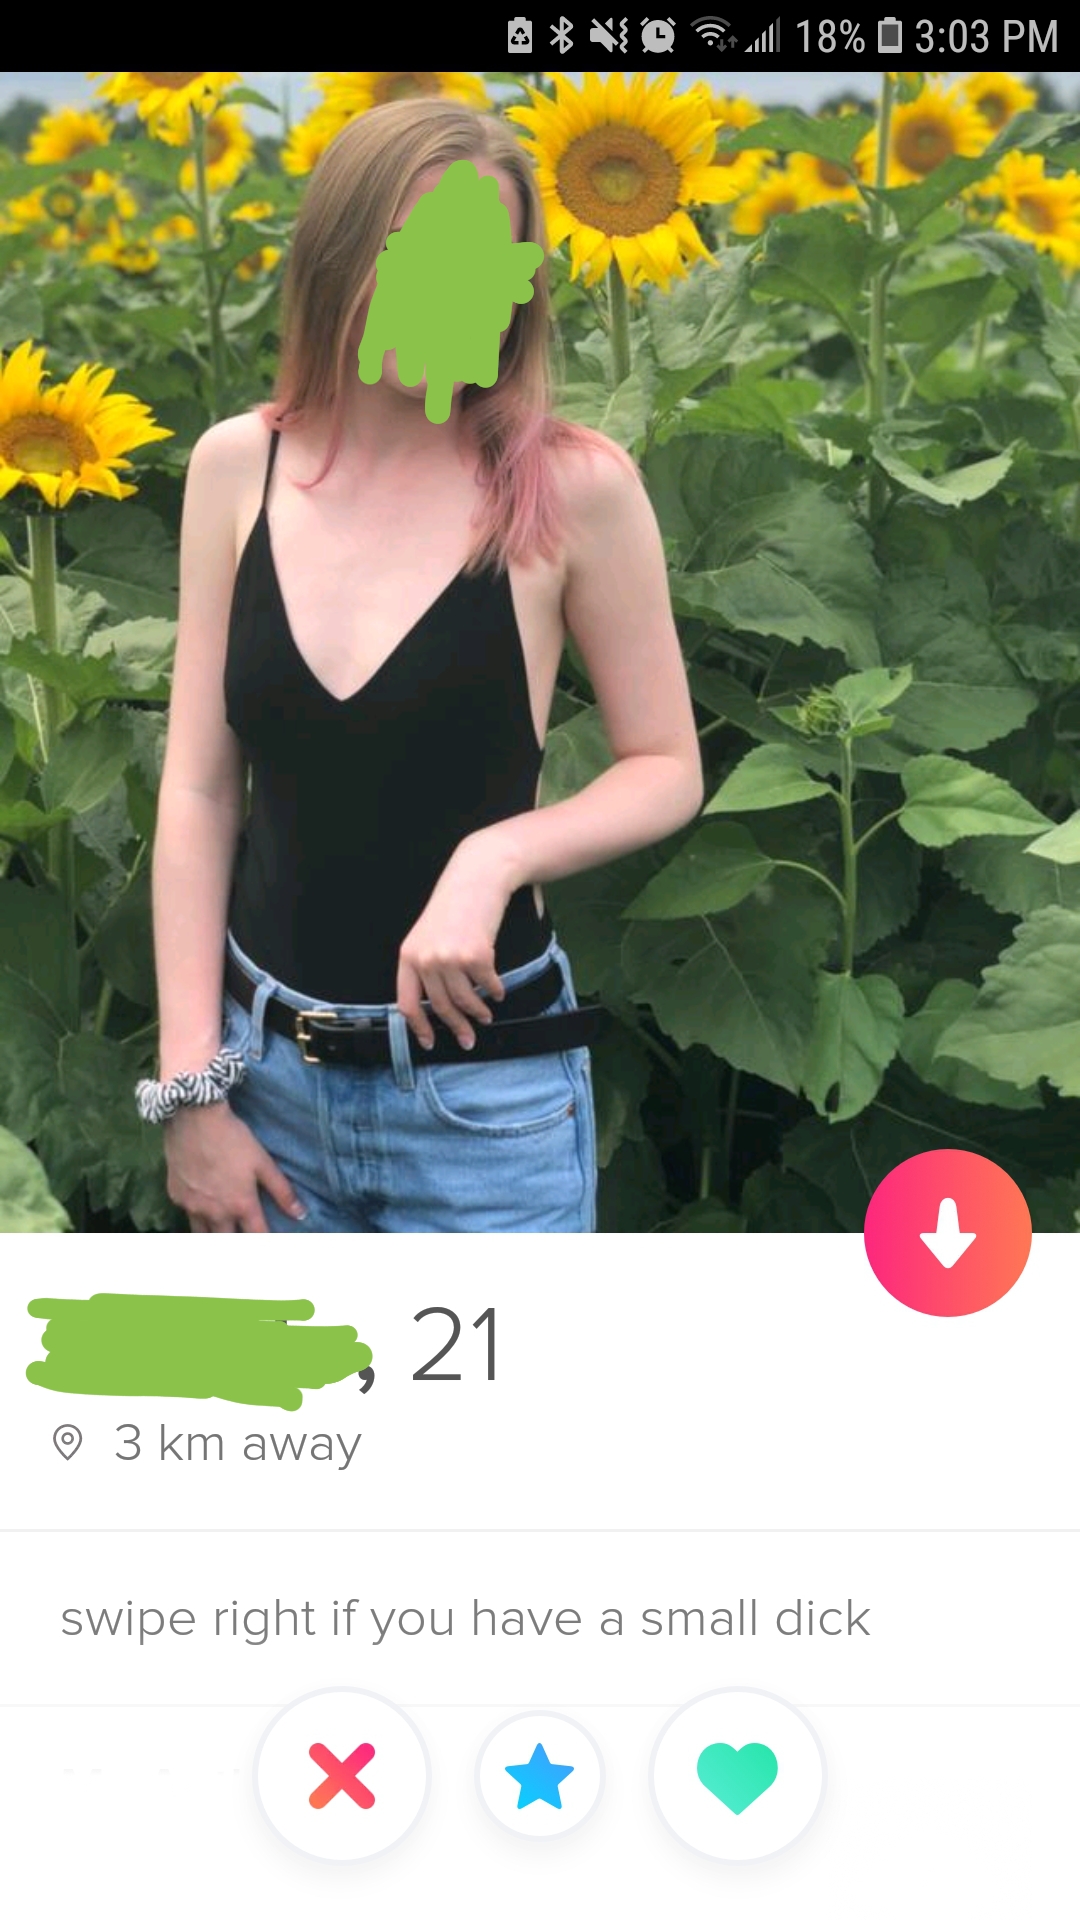 tinder - summer - No 18% 21 ~ 3 km away swipe right if you have a small dick